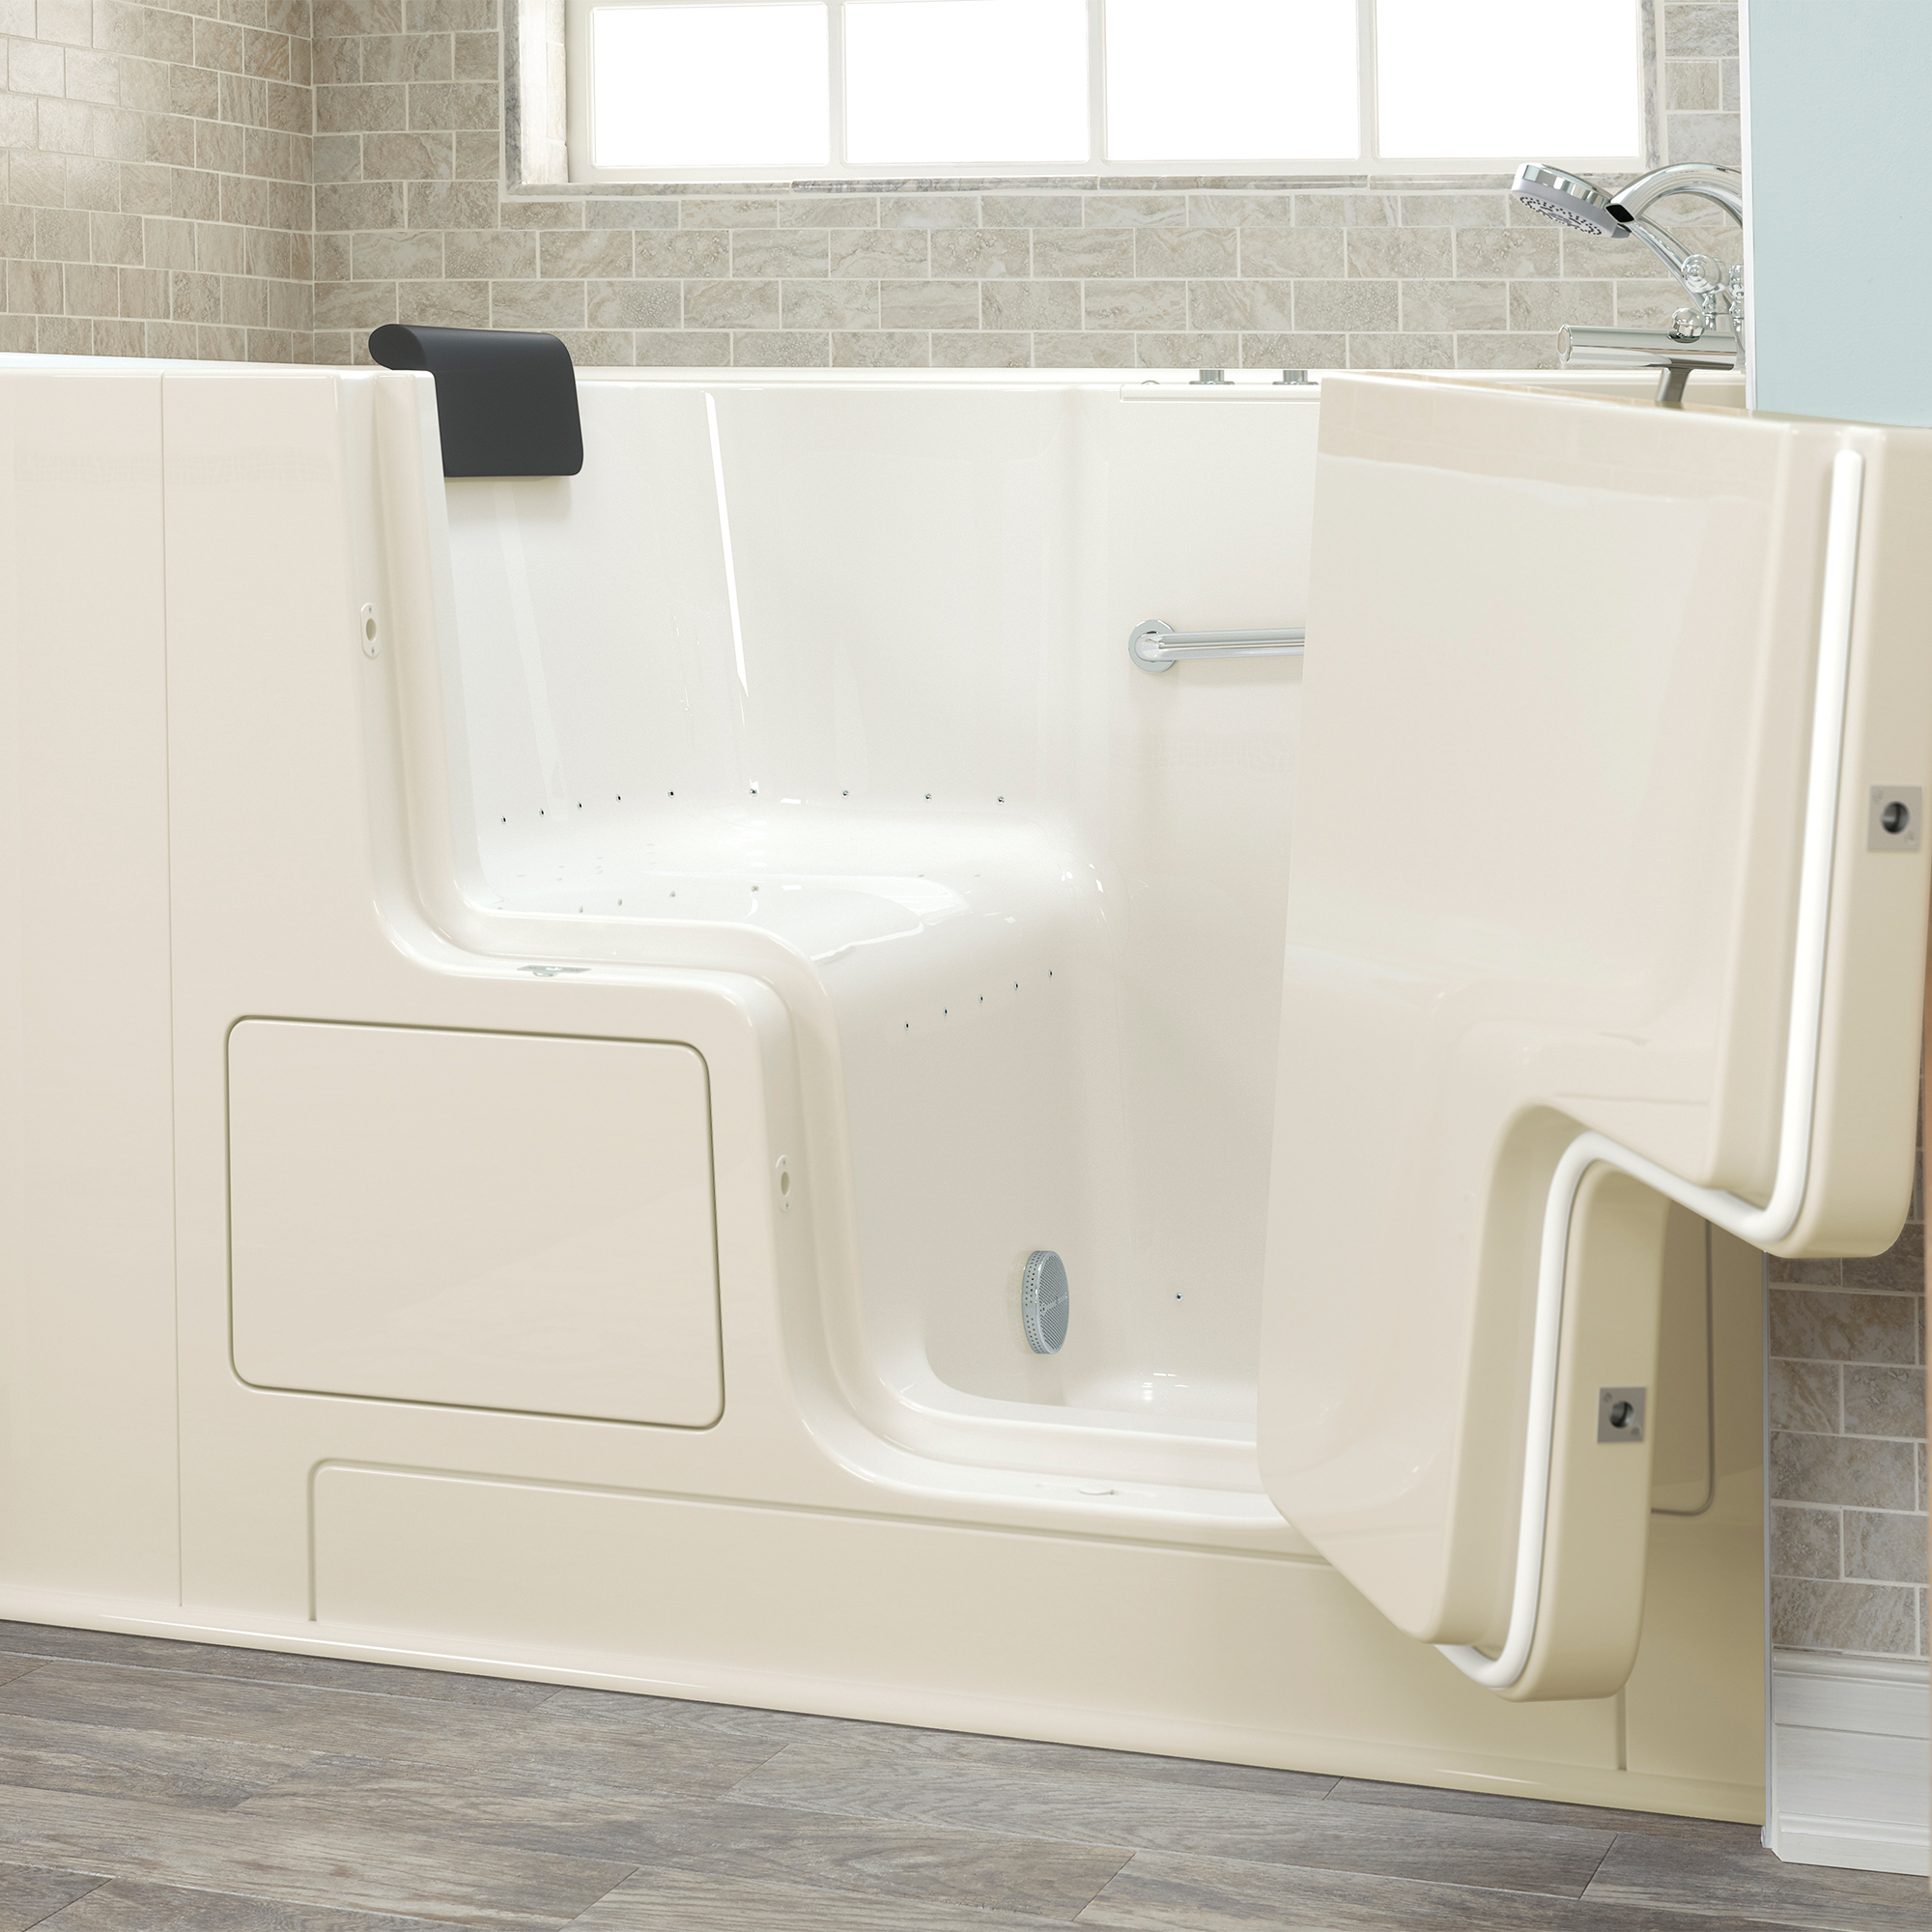 Gelcoat Premium Series 32 x 52 -Inch Walk-in Tub With Air Spa System - Right-Hand Drain With Faucet